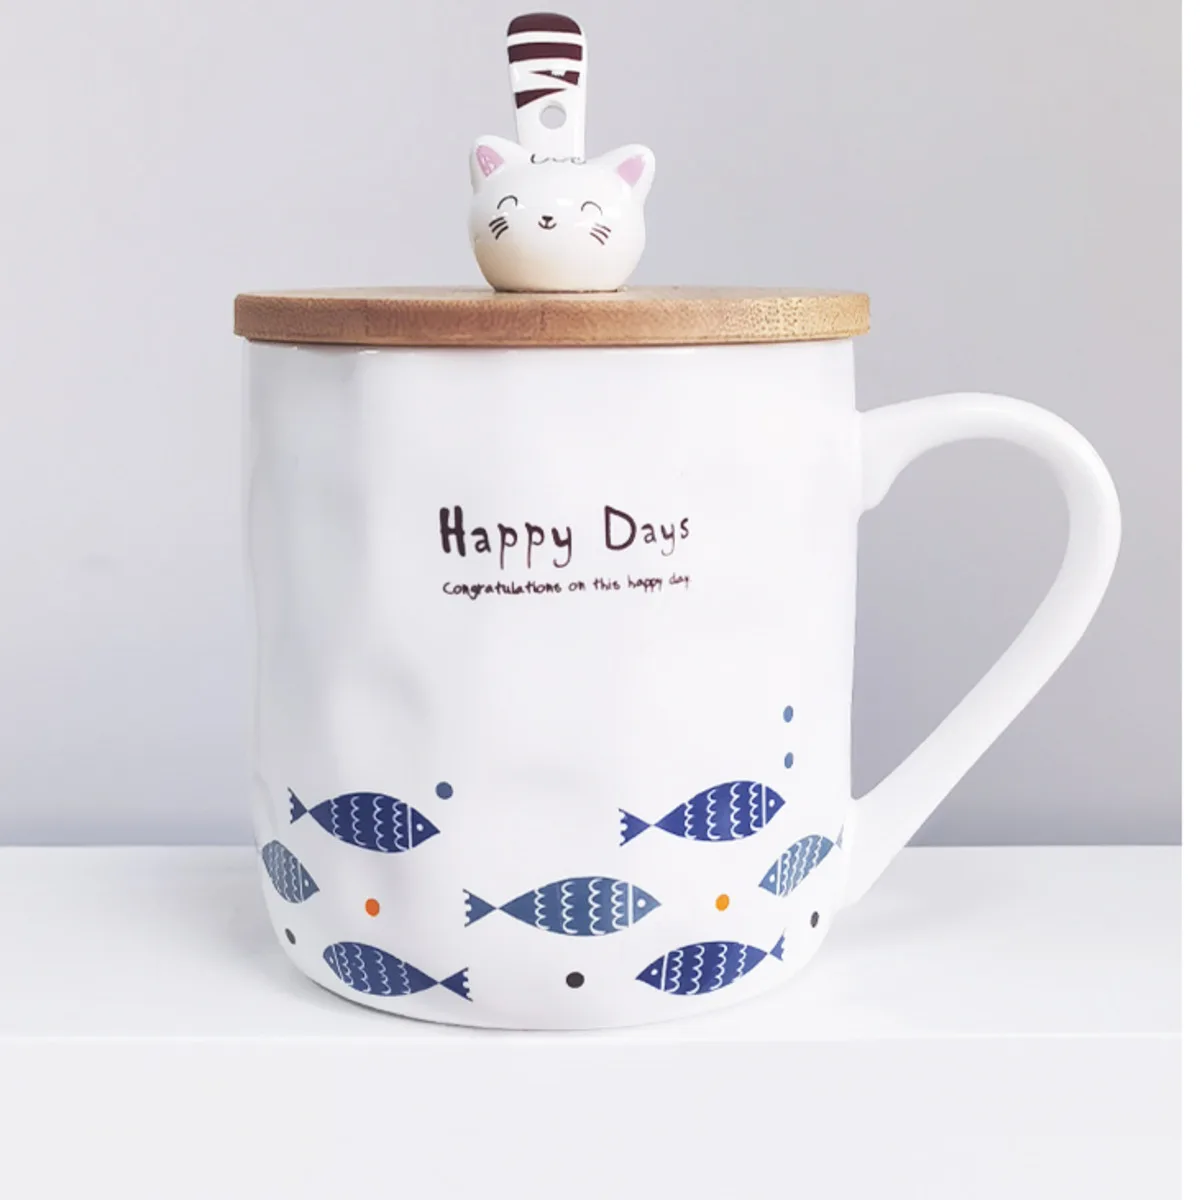 

Cute cartoon kitten Mimi blue white fish ceramic water mark cup wooden cover spoon milk breakfast gift sublimation blanks